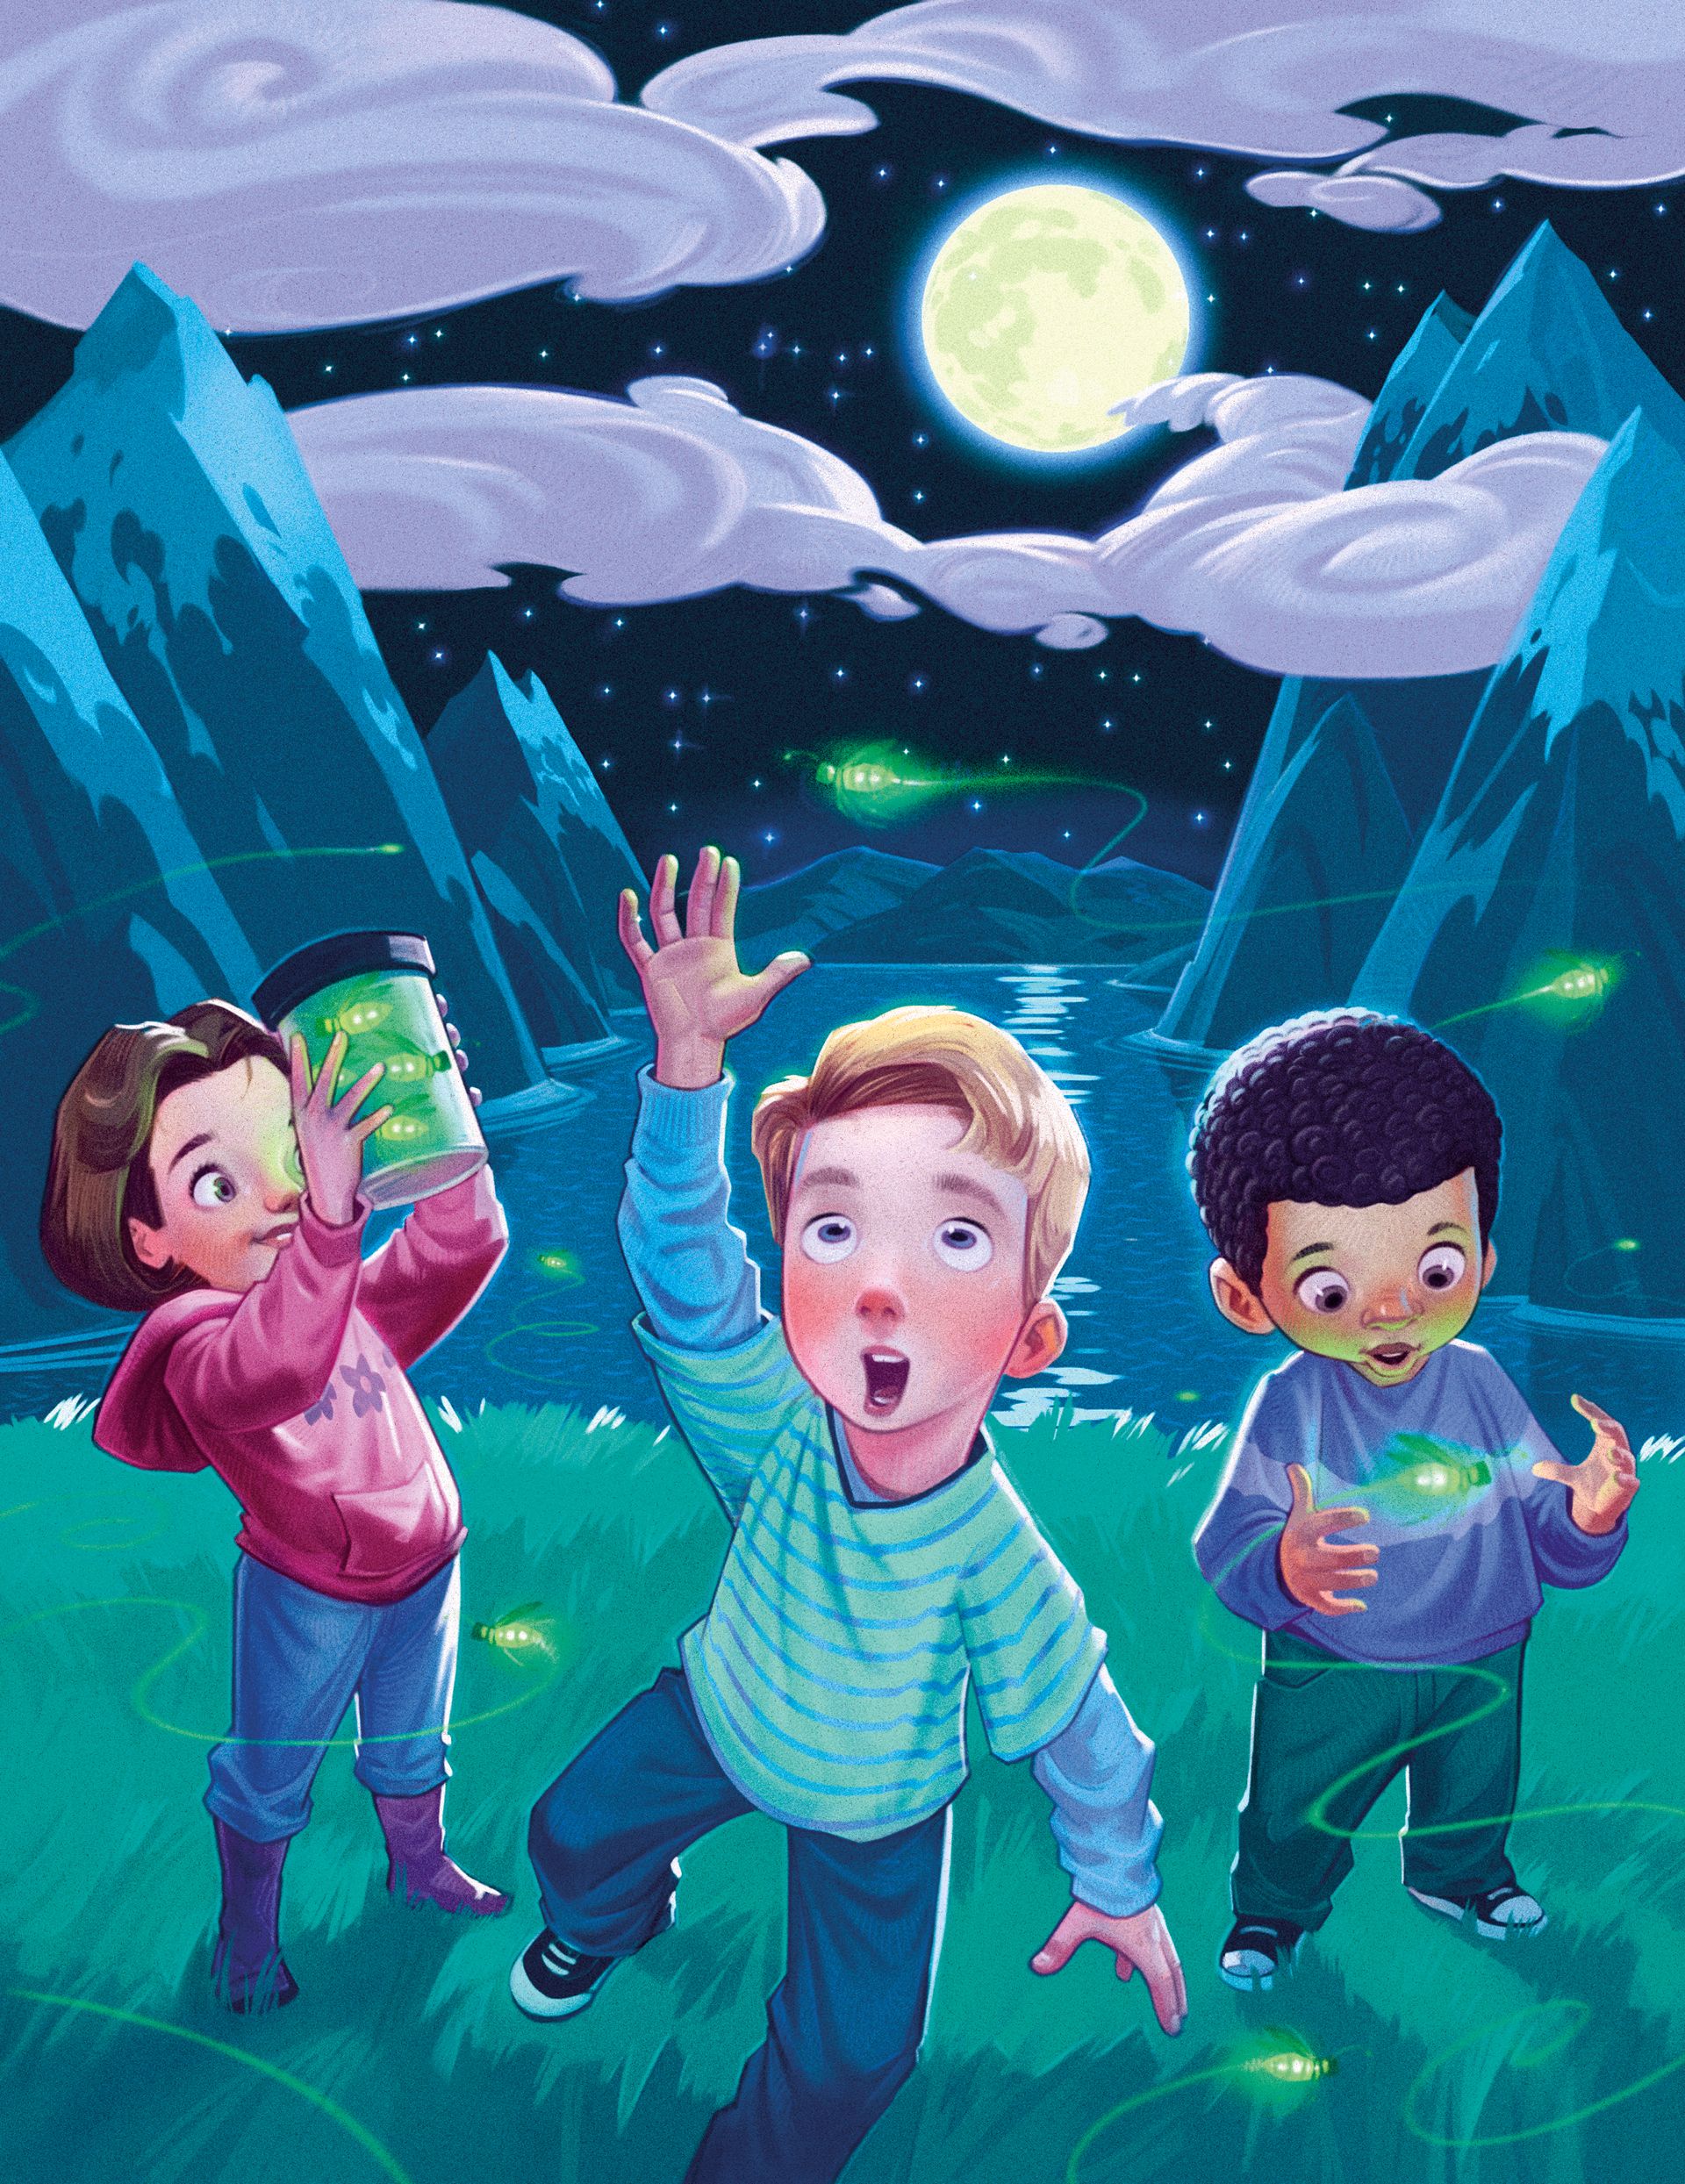 Two boys and a girl stand outside during a full moon and catch fireflies.